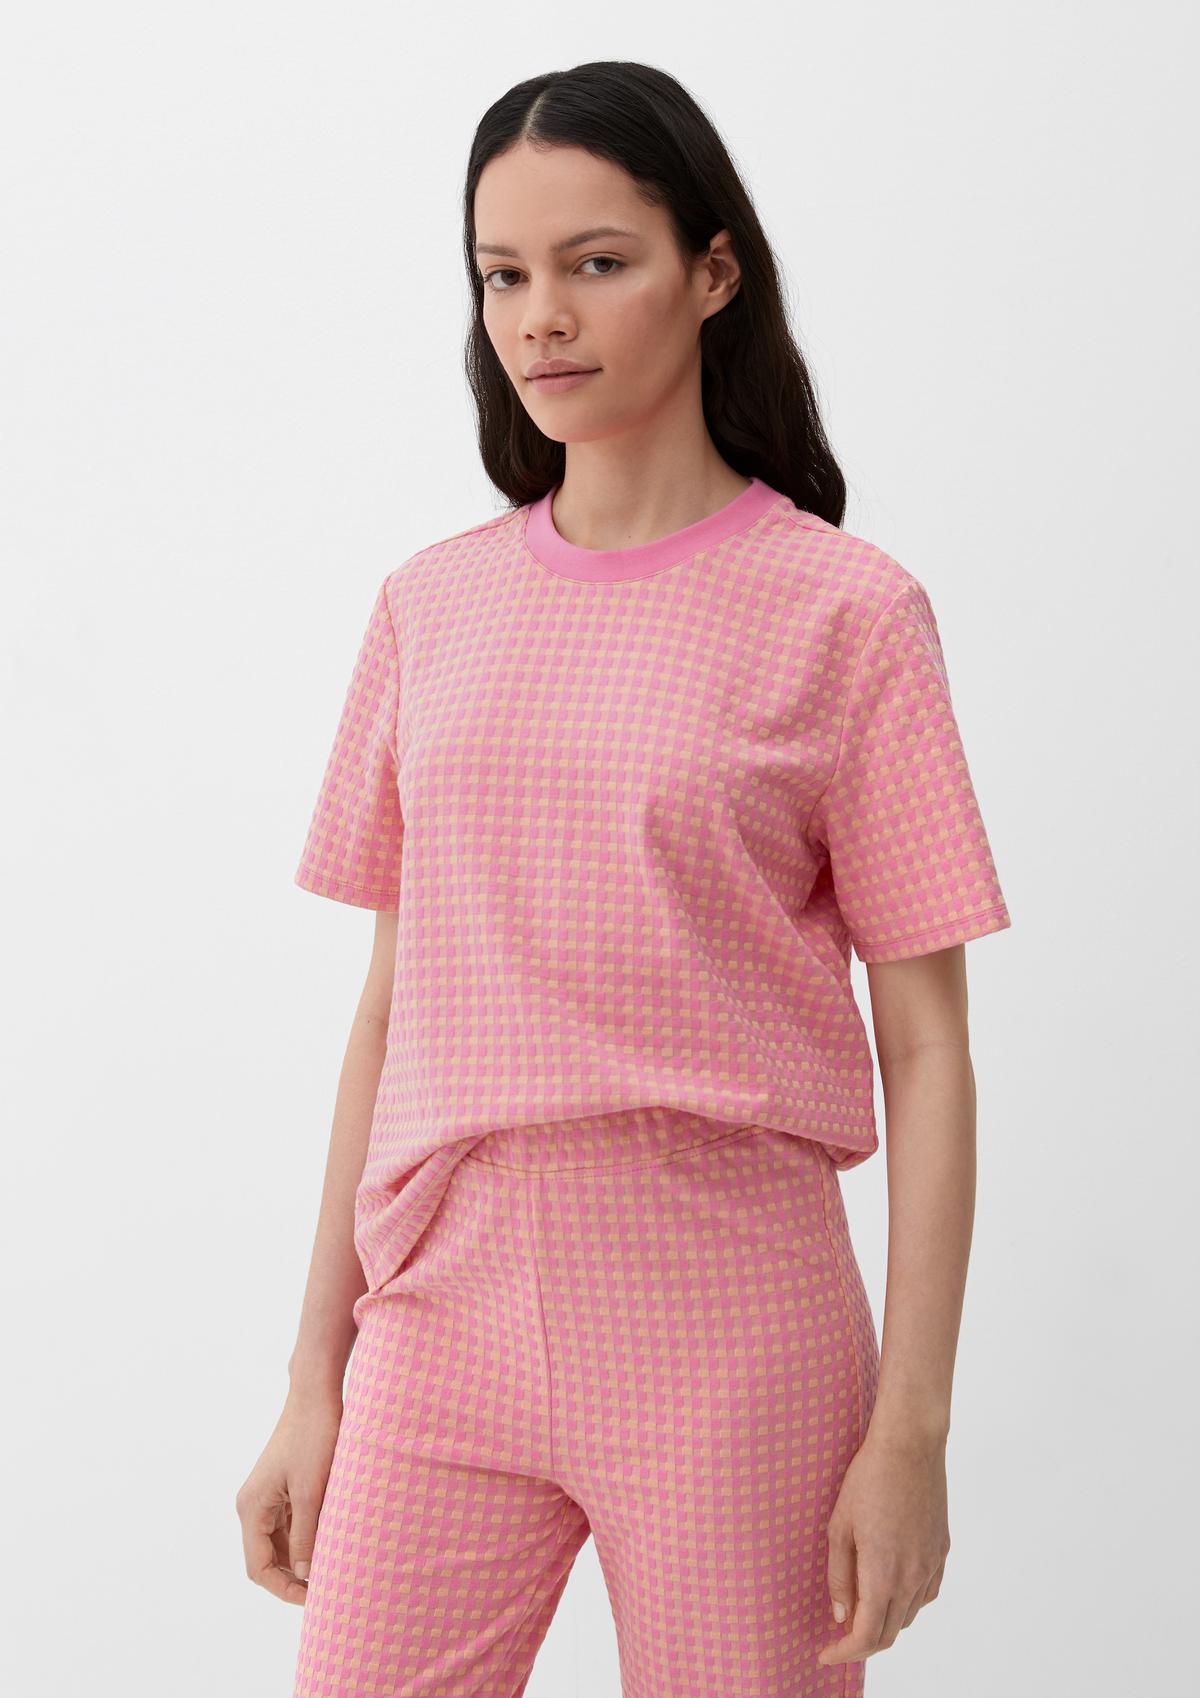 - jacquard with T-shirt a texture pink